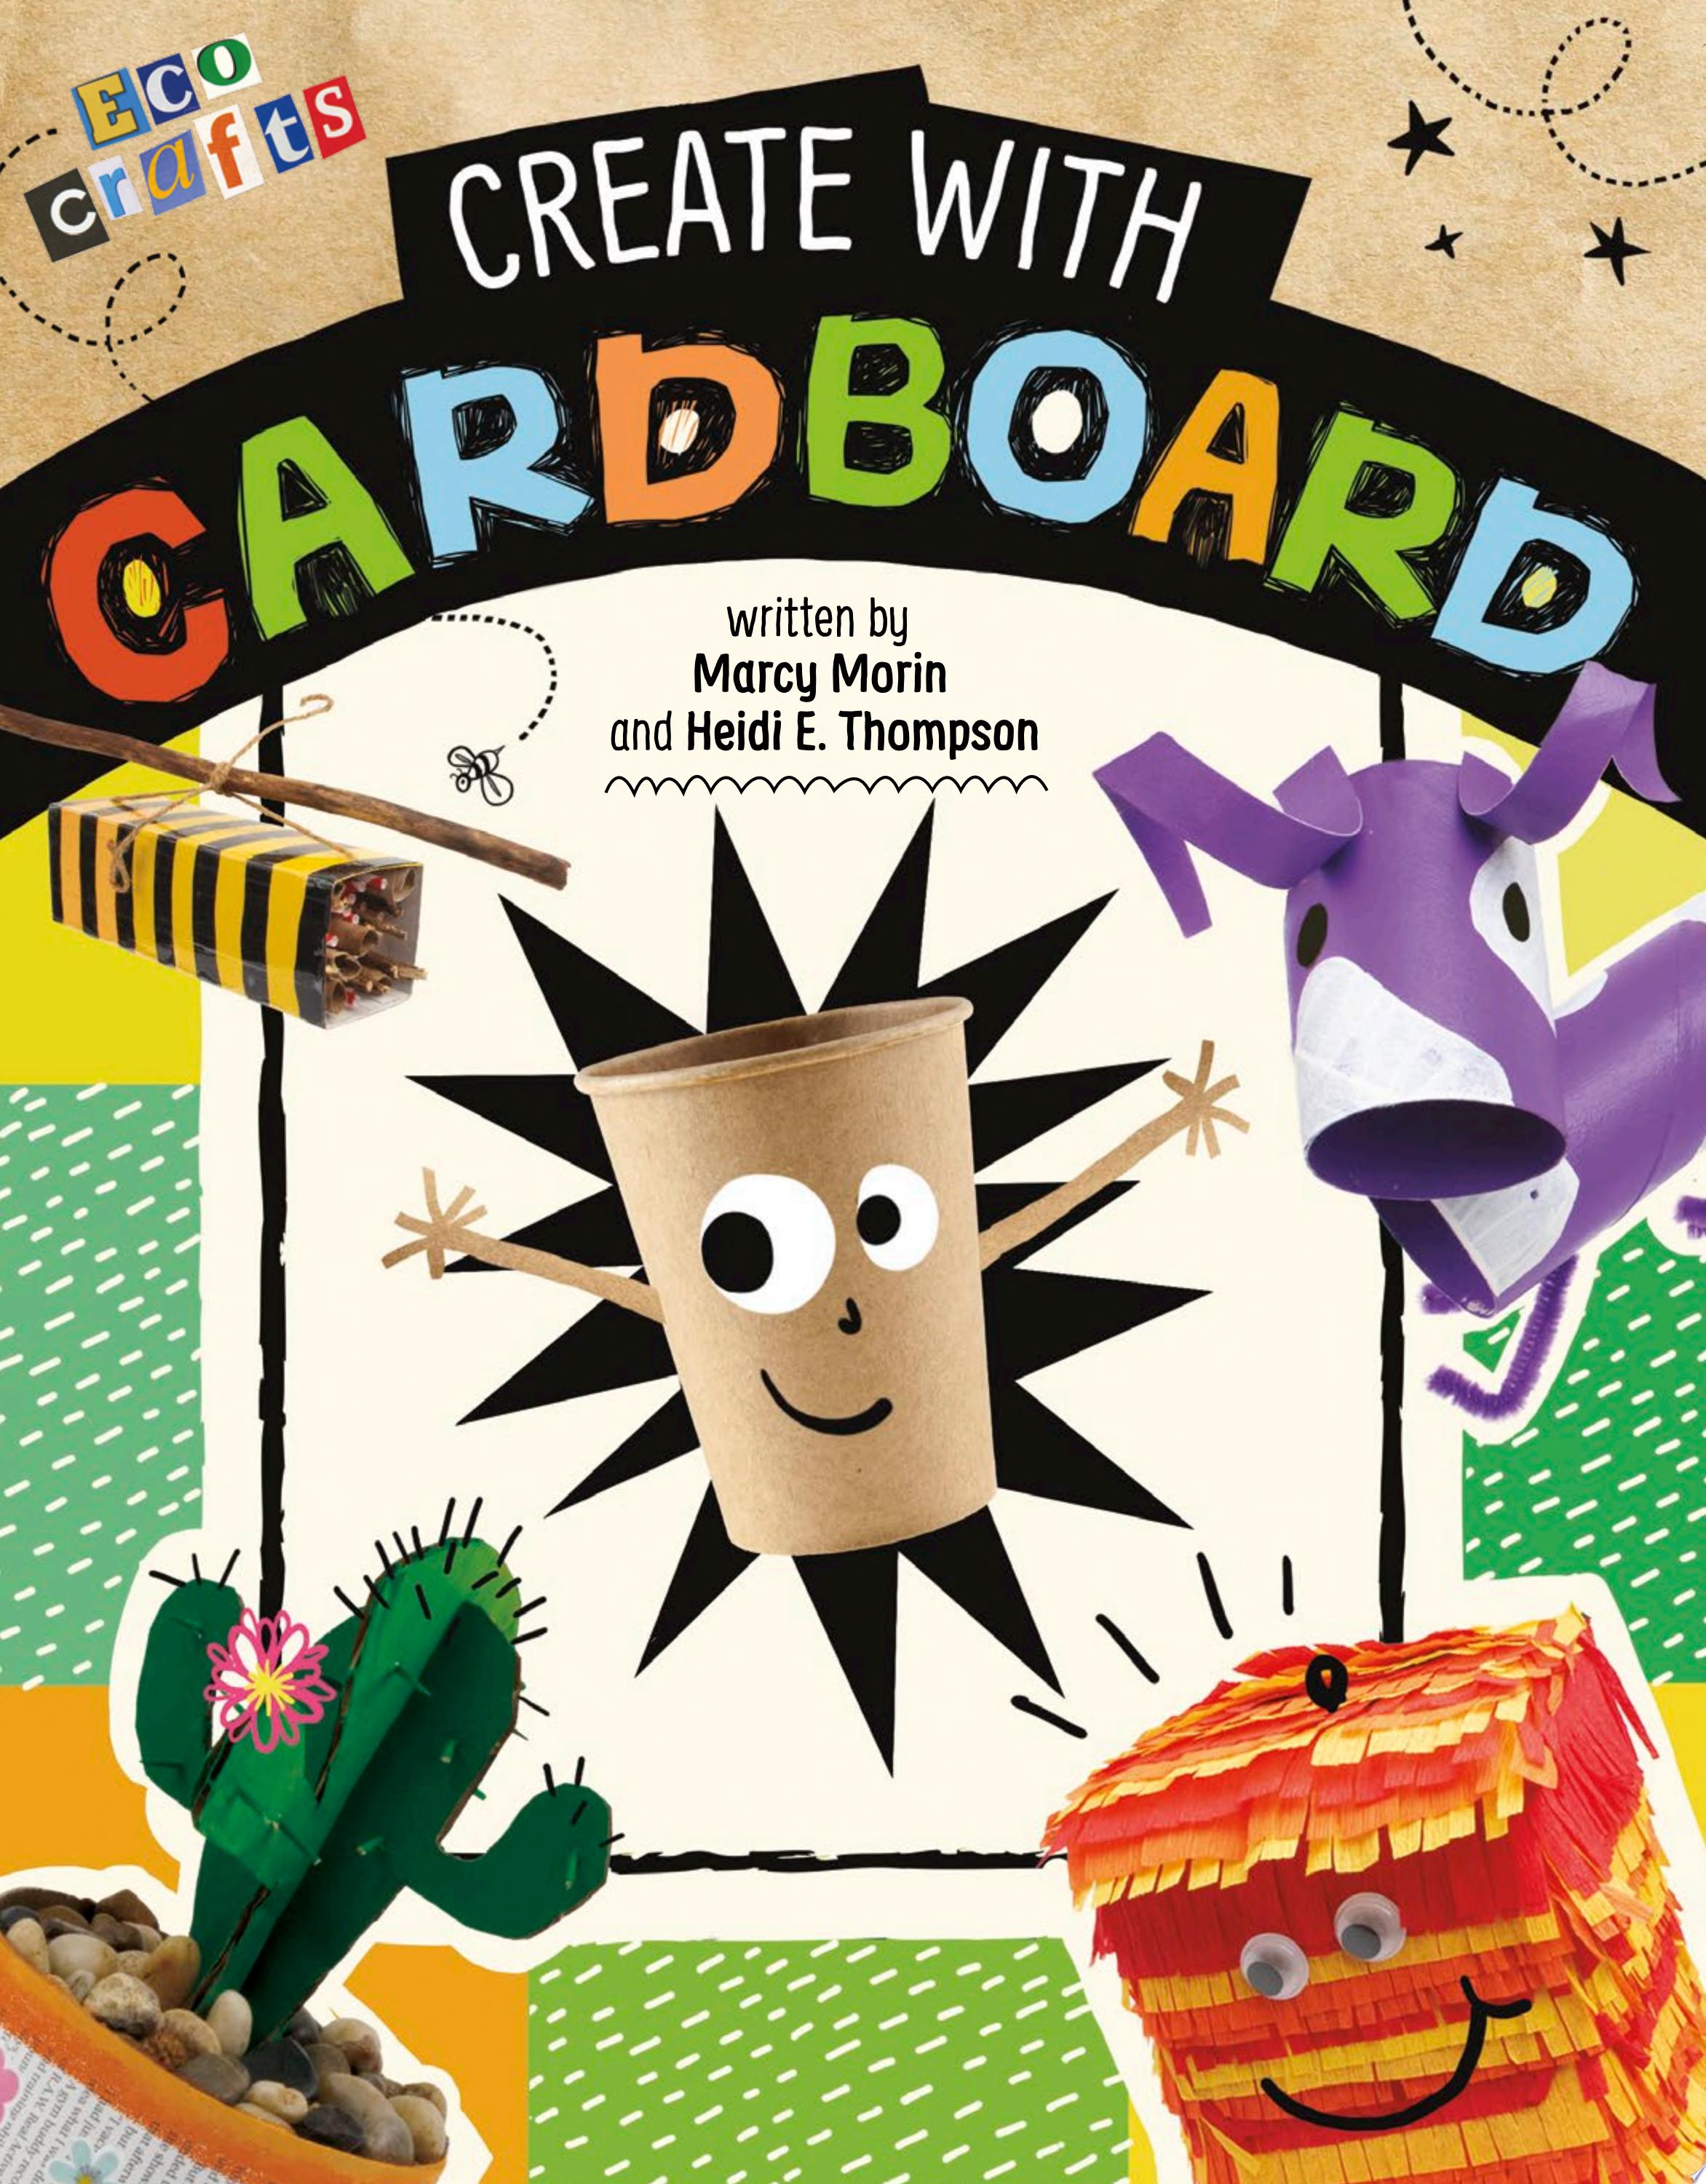 Image for "Create with Cardboard"